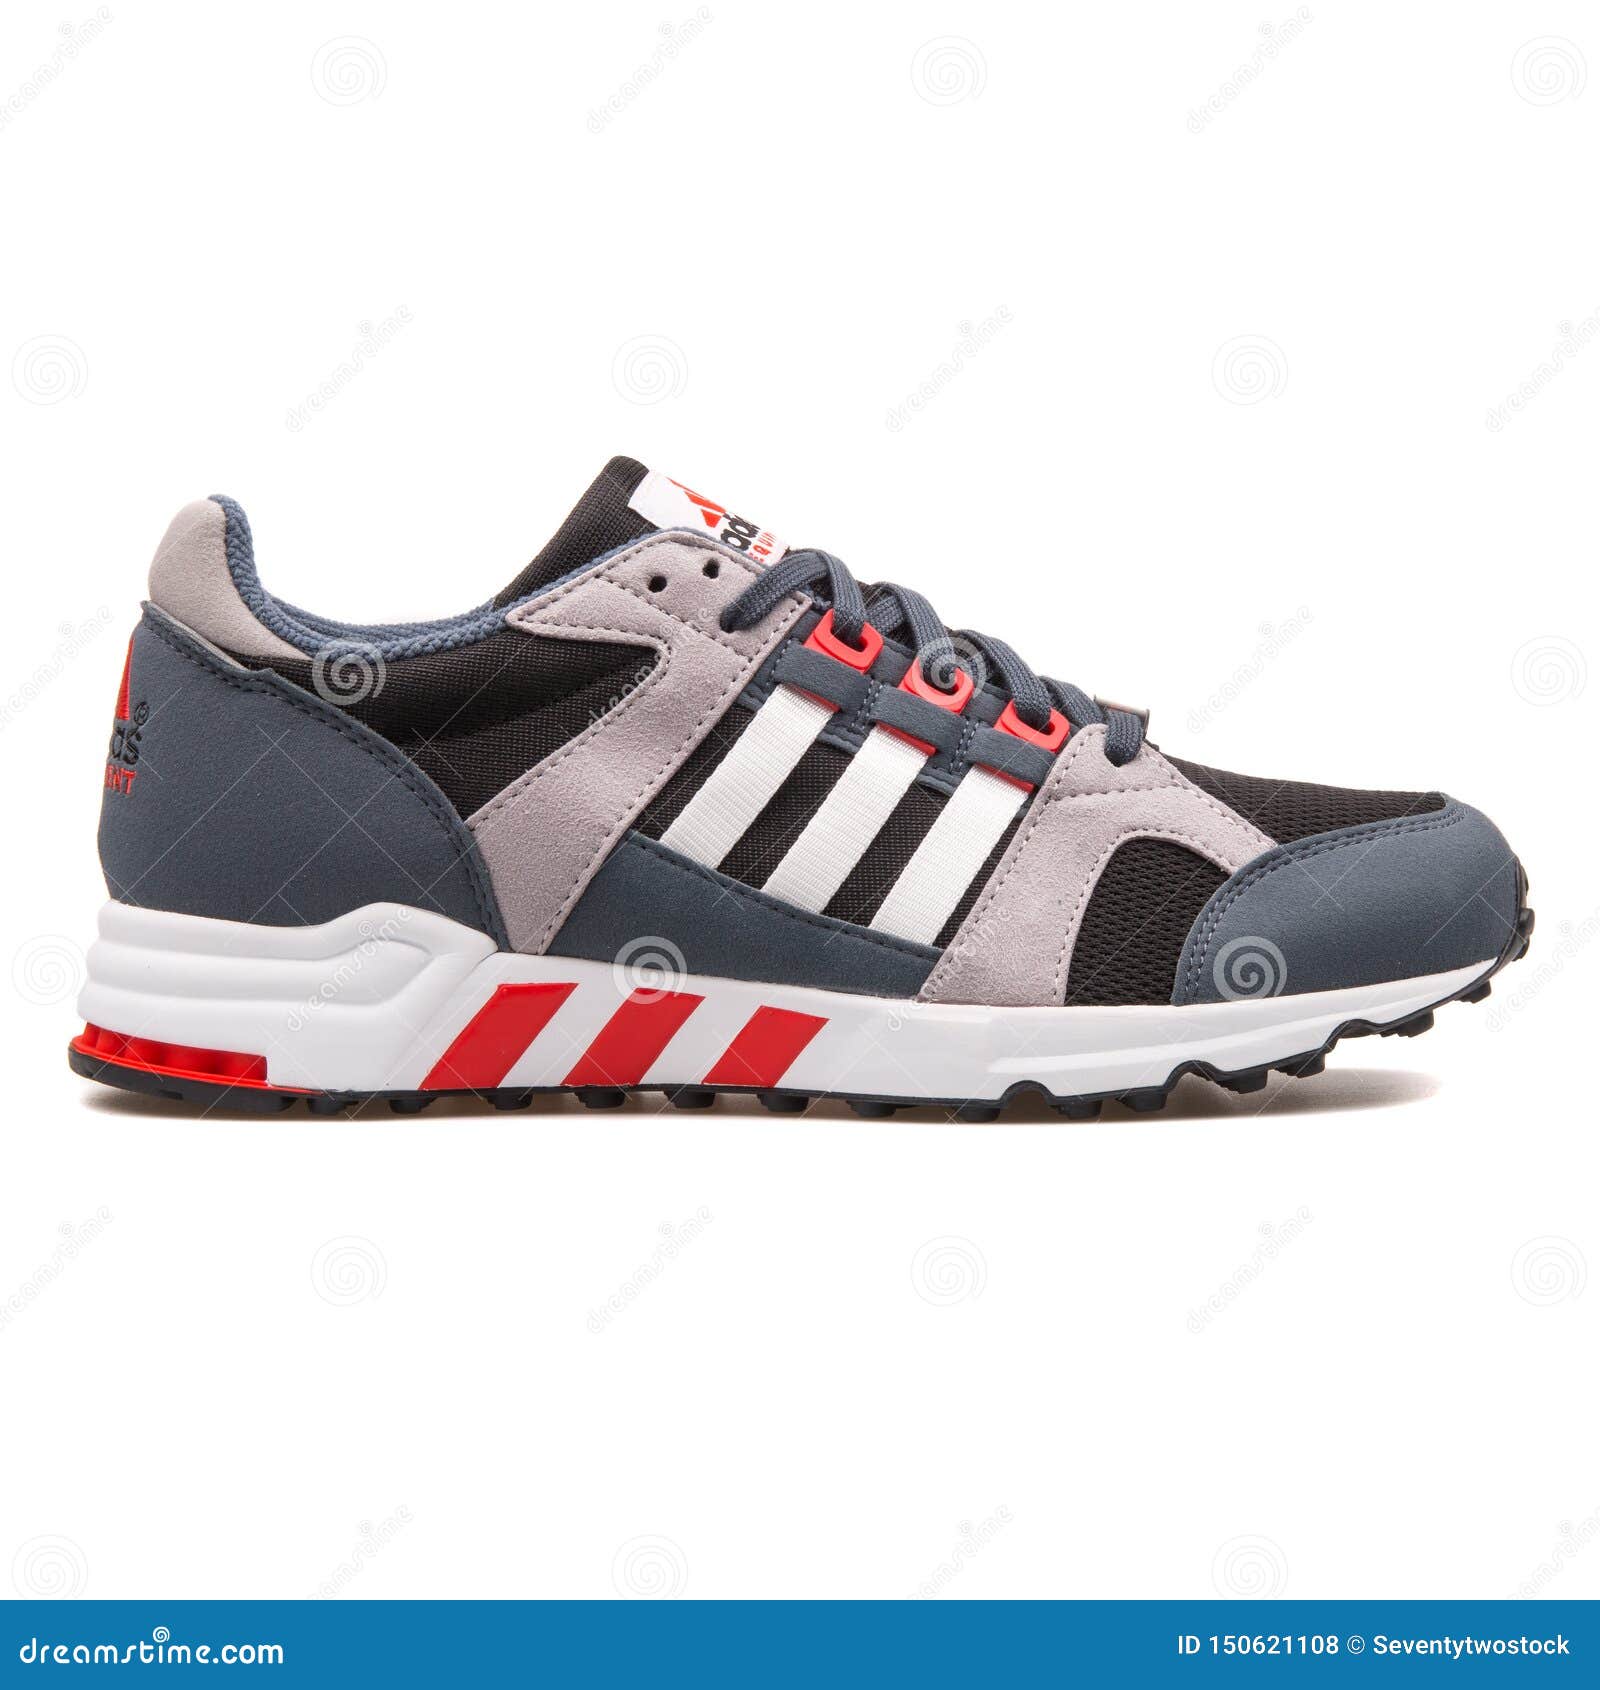 Adidas Equipment Running Cushion Black, Blue, Grey and Red Sneaker